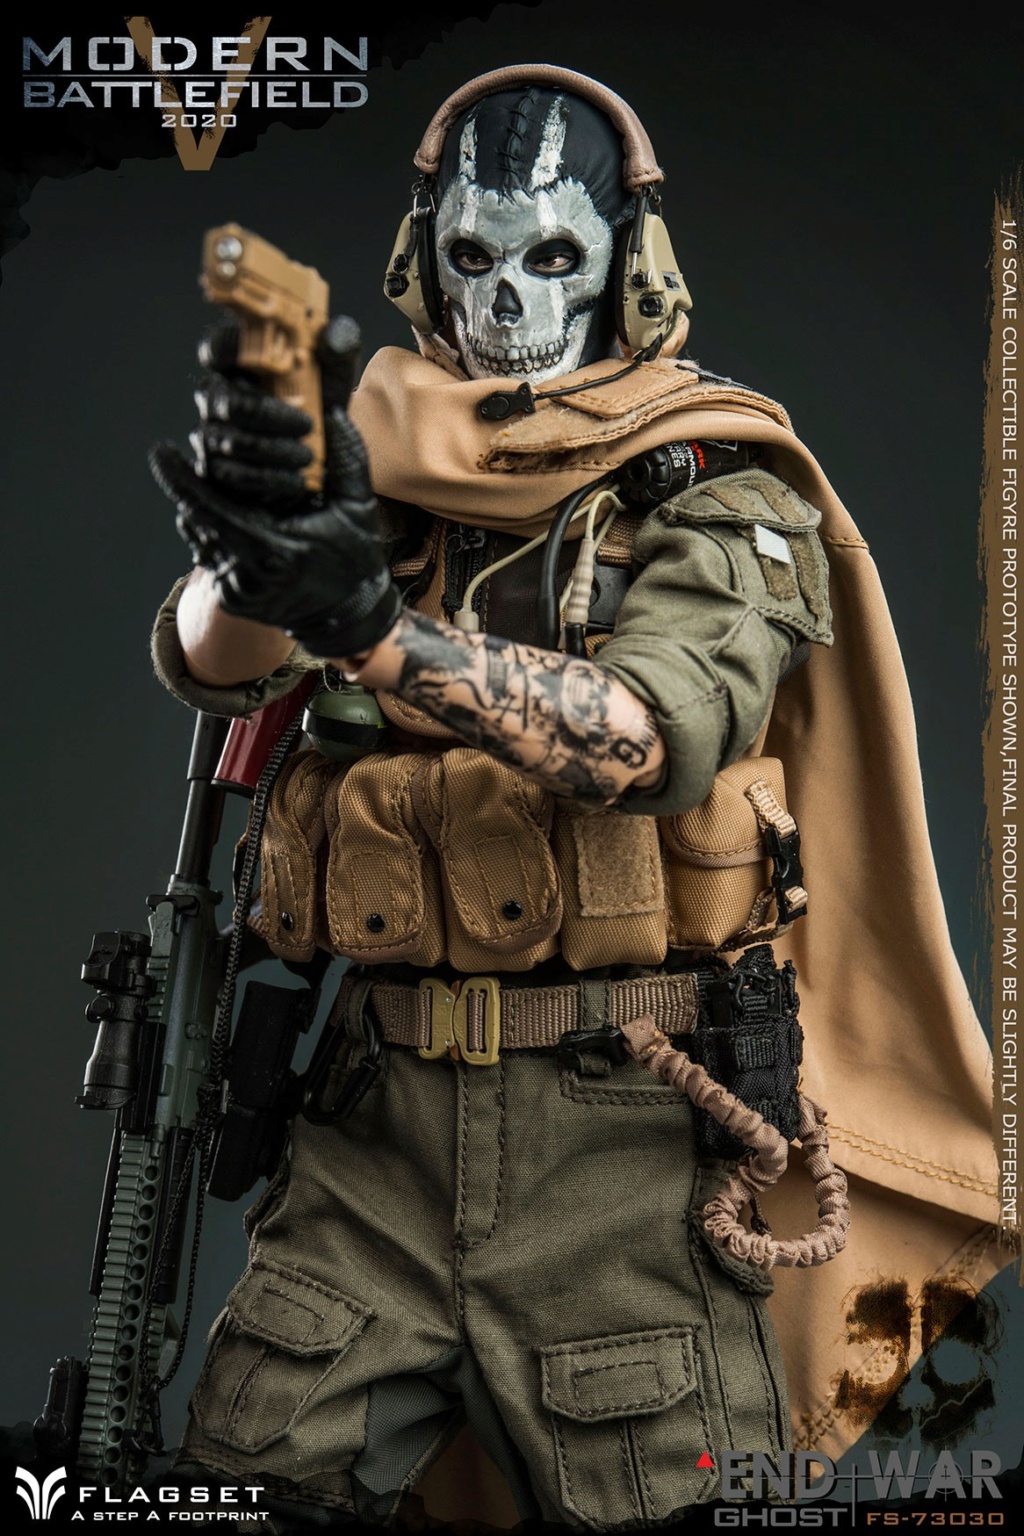 NEW PRODUCT: FLAGSET: 1/6 SCALE FIGURE MODERN BATTLEFIELD END WAR V GHOST 19255210